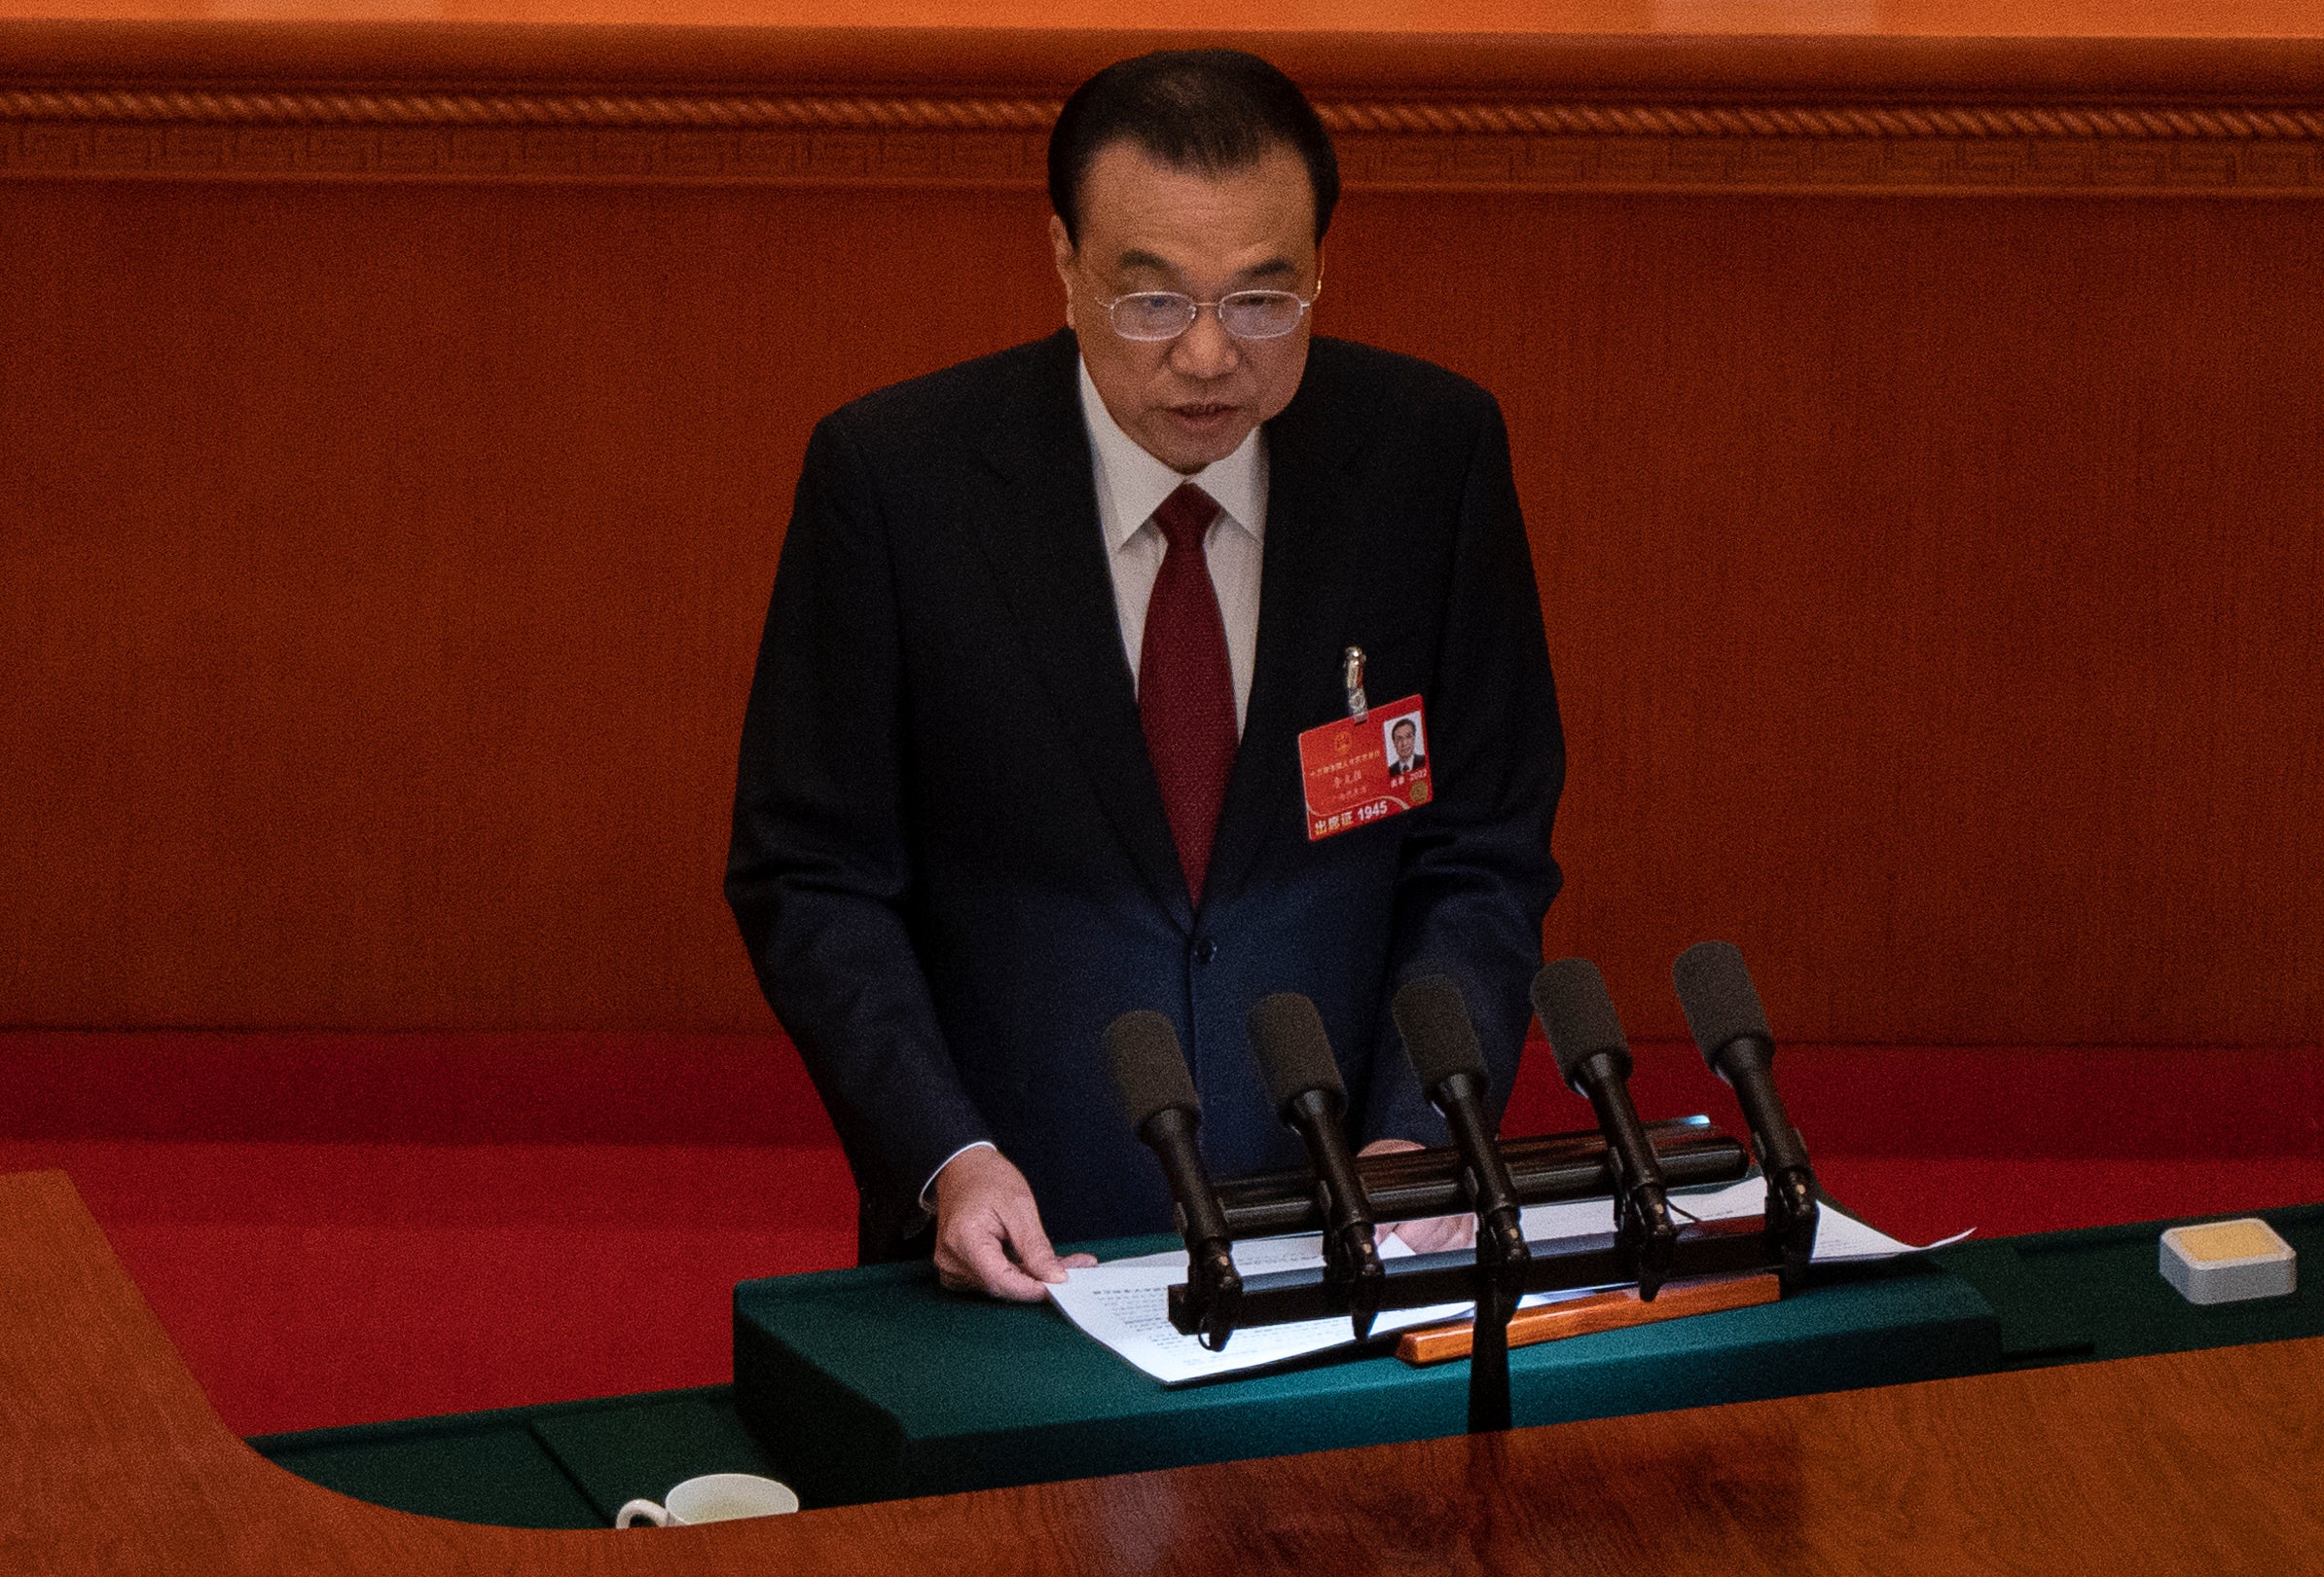 Chinese Premier Li Keqiang speaks from the podium at the opening session of the National Peoples Congress at the Great Hall of the People on 5 March 2022 in Beijing, China